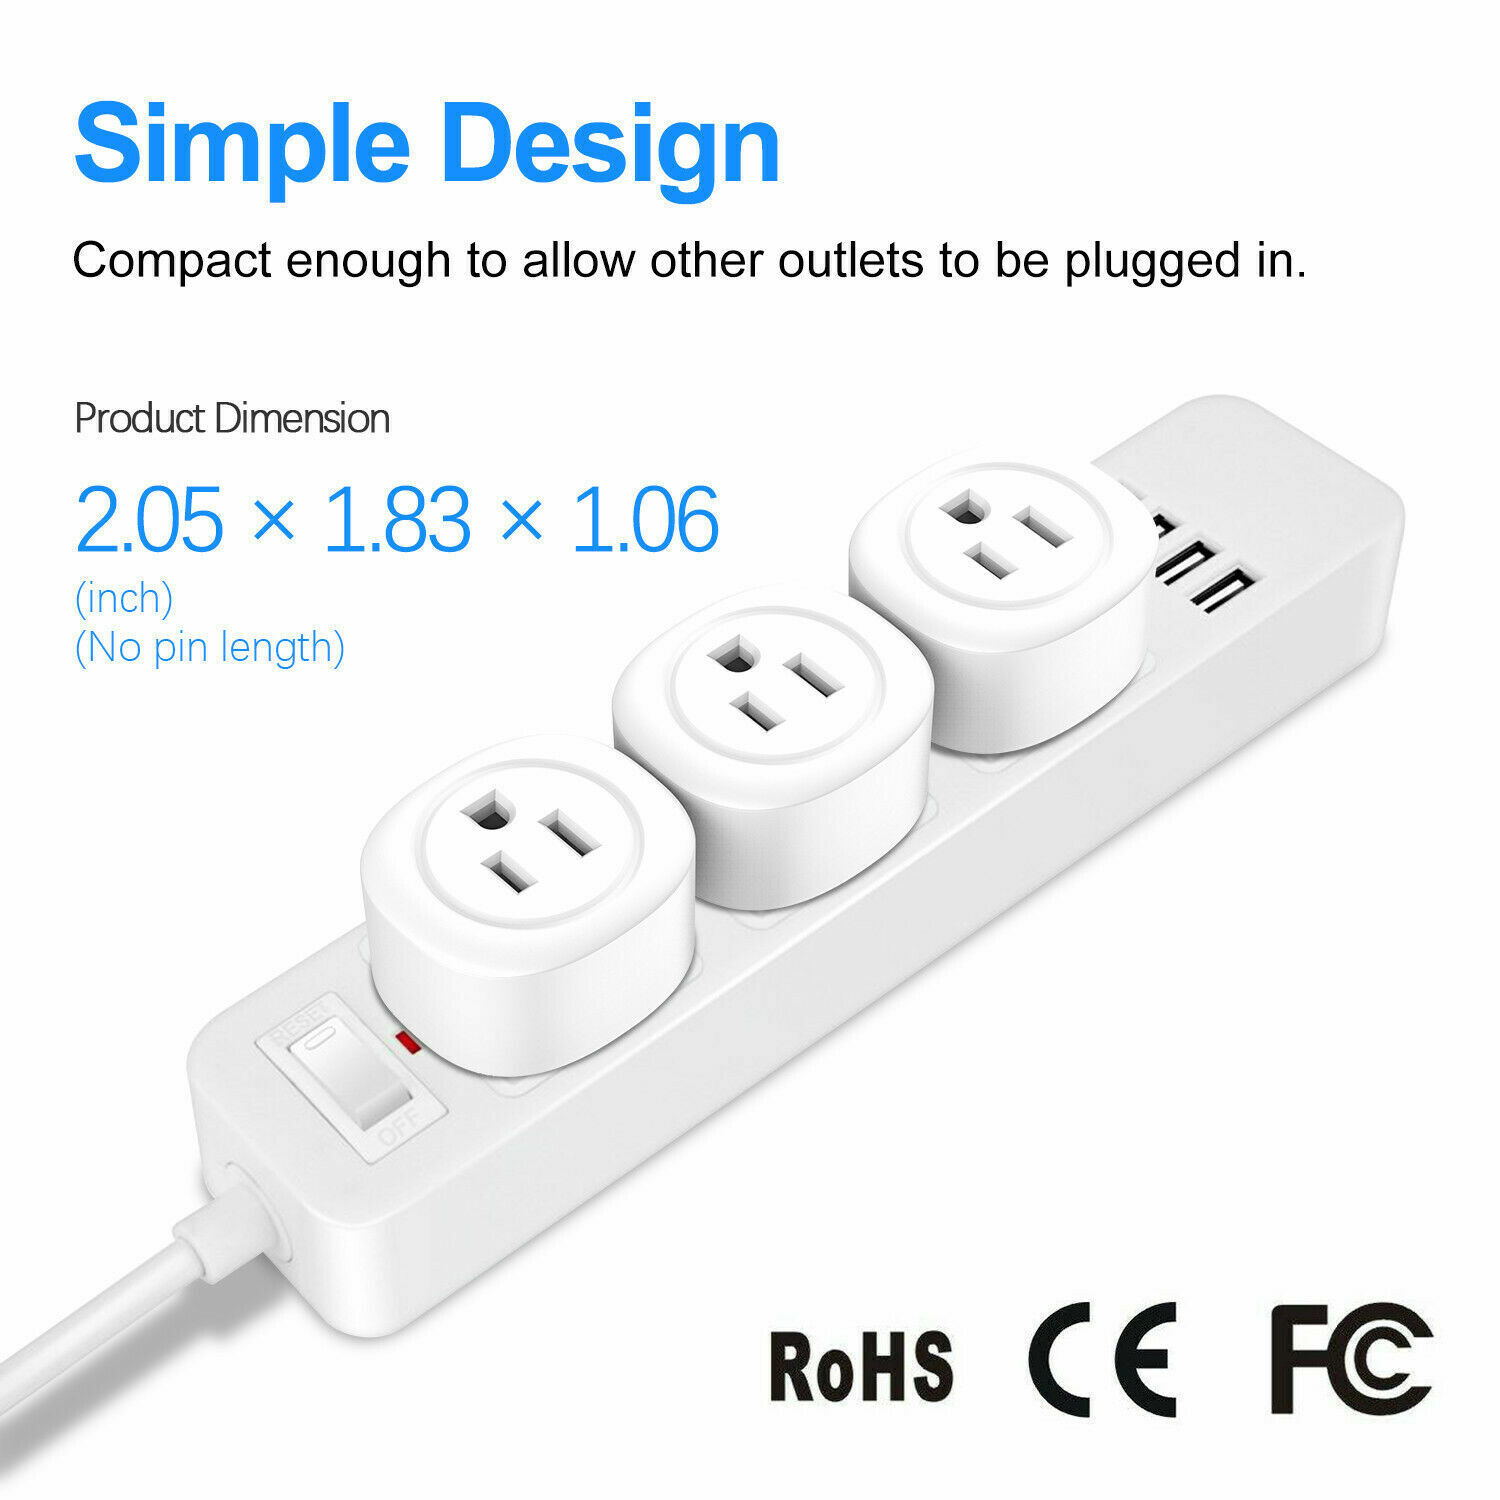 4 Pack Wifi Smart Plug Outlet Phone Remote Control Socket Timer Alexa Google US Kootion Does not apply - фотография #6